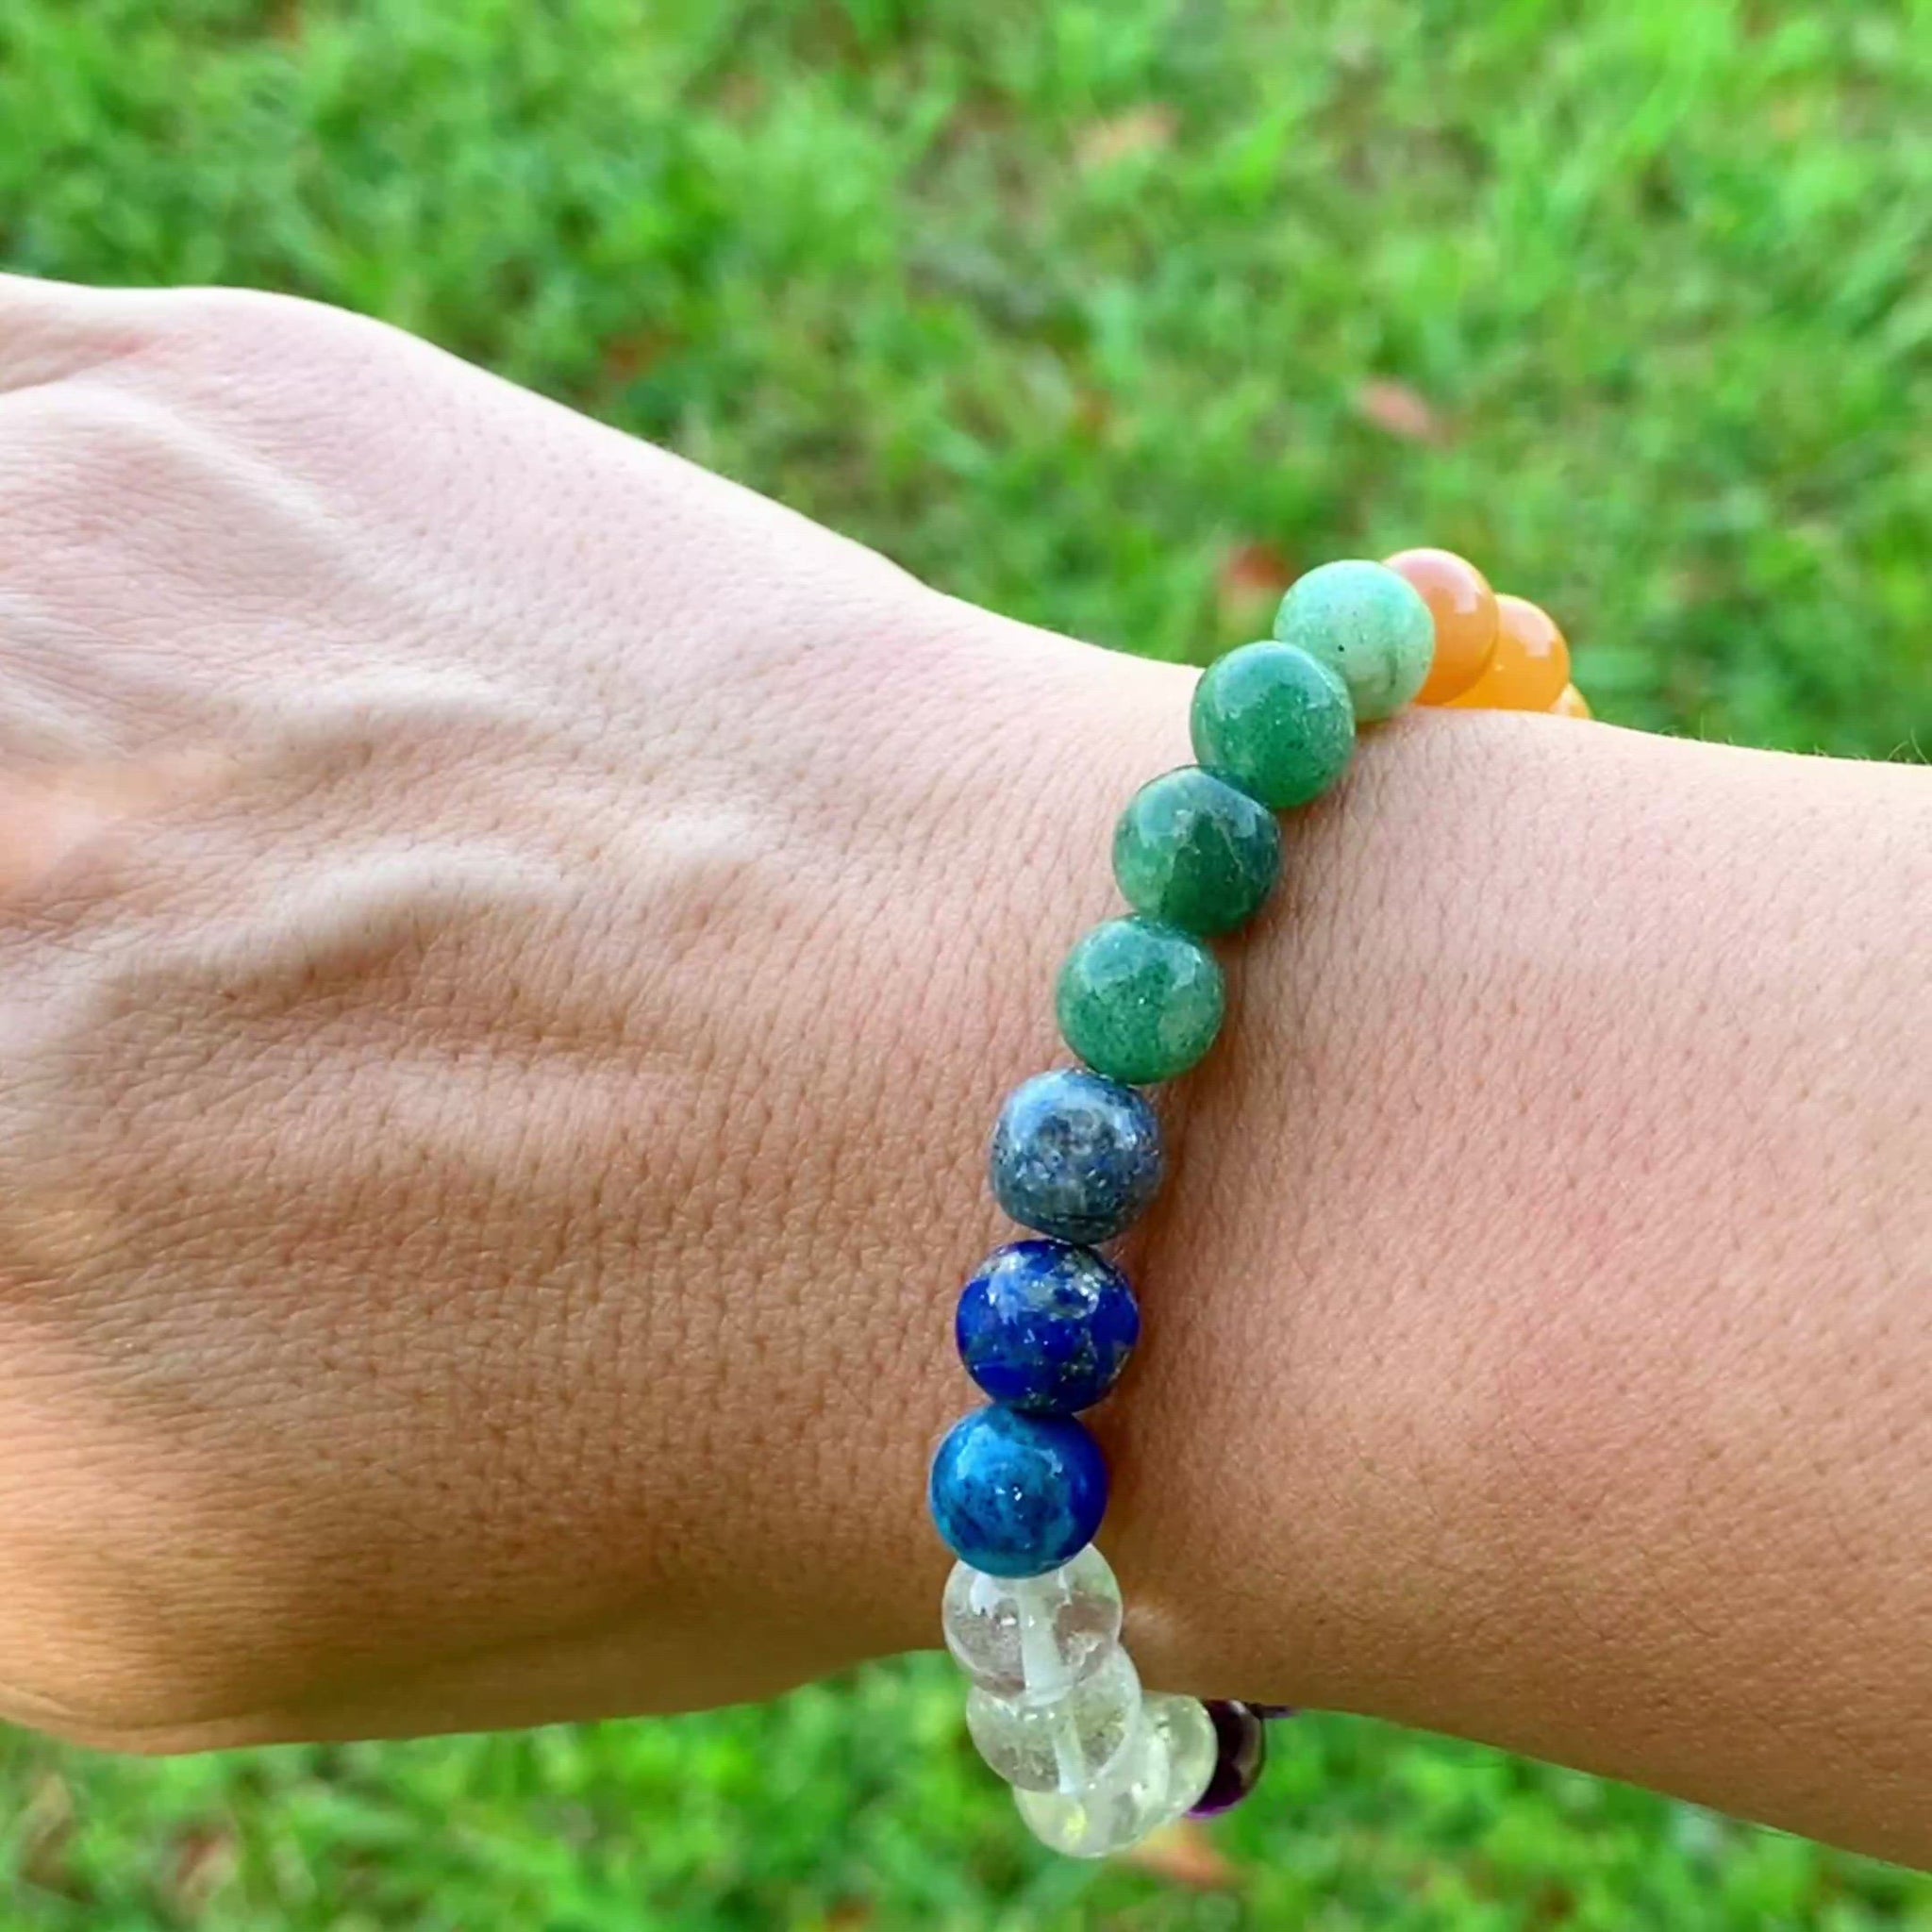 Looking for 7 Chakra Stone Beaded Bracelet? Shop at Magic Crystals for crystal healing Seven Chakra Jewelry. Reiki Healing Crystal Gemstone Yoga Energy Handmade Gift. FREE SHIPPING IS AVAILABLE. Beaded jewelry, and bracelets made for healing. Healing stone bracelet. Chakra jewelry.